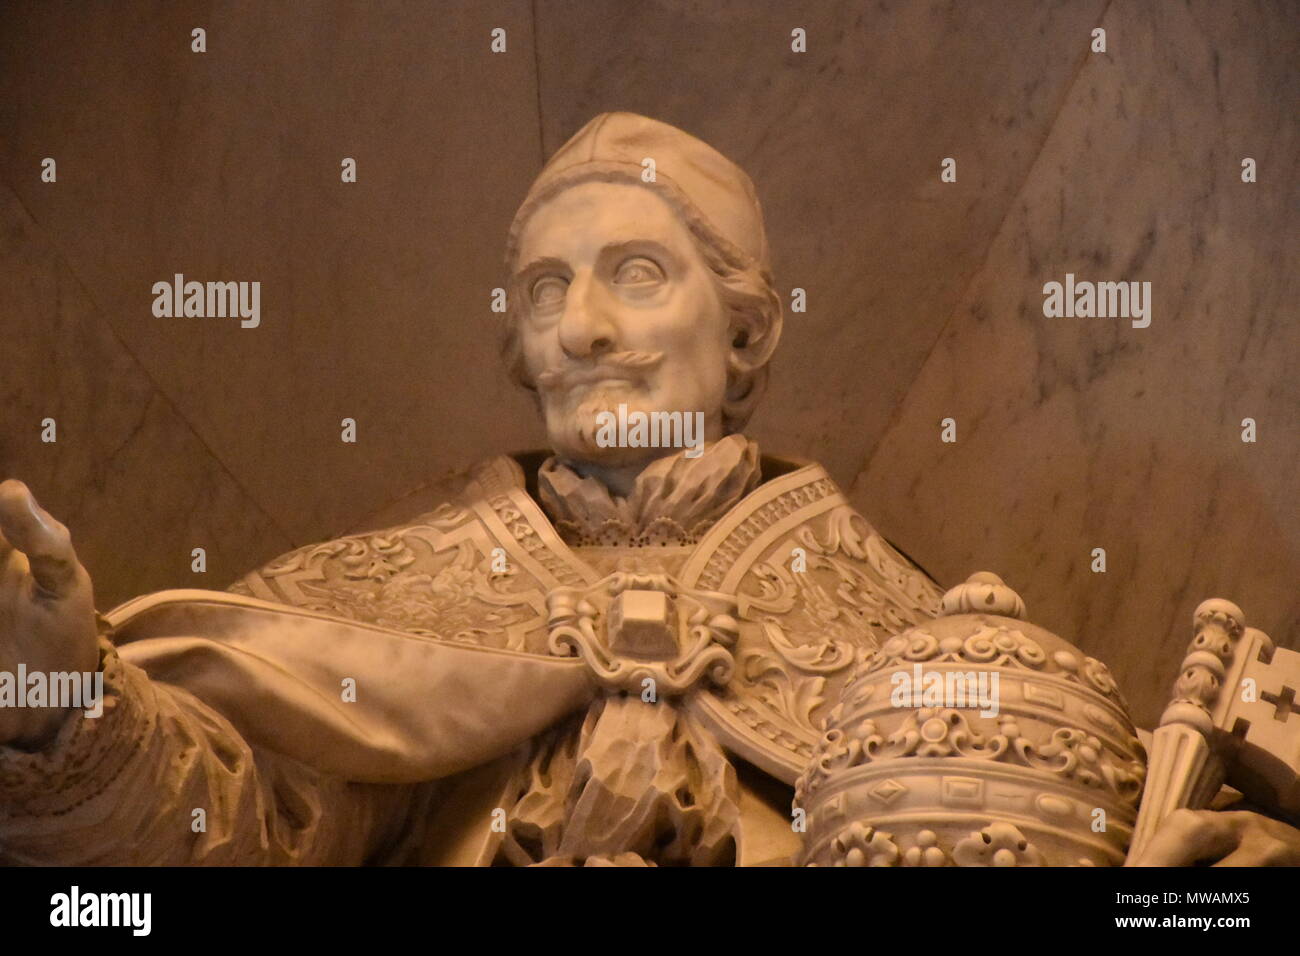 Rome, 18 may 2018  Interior of St. Peter's Basilica in the Vatican. Details of memorial altars. Stock Photo